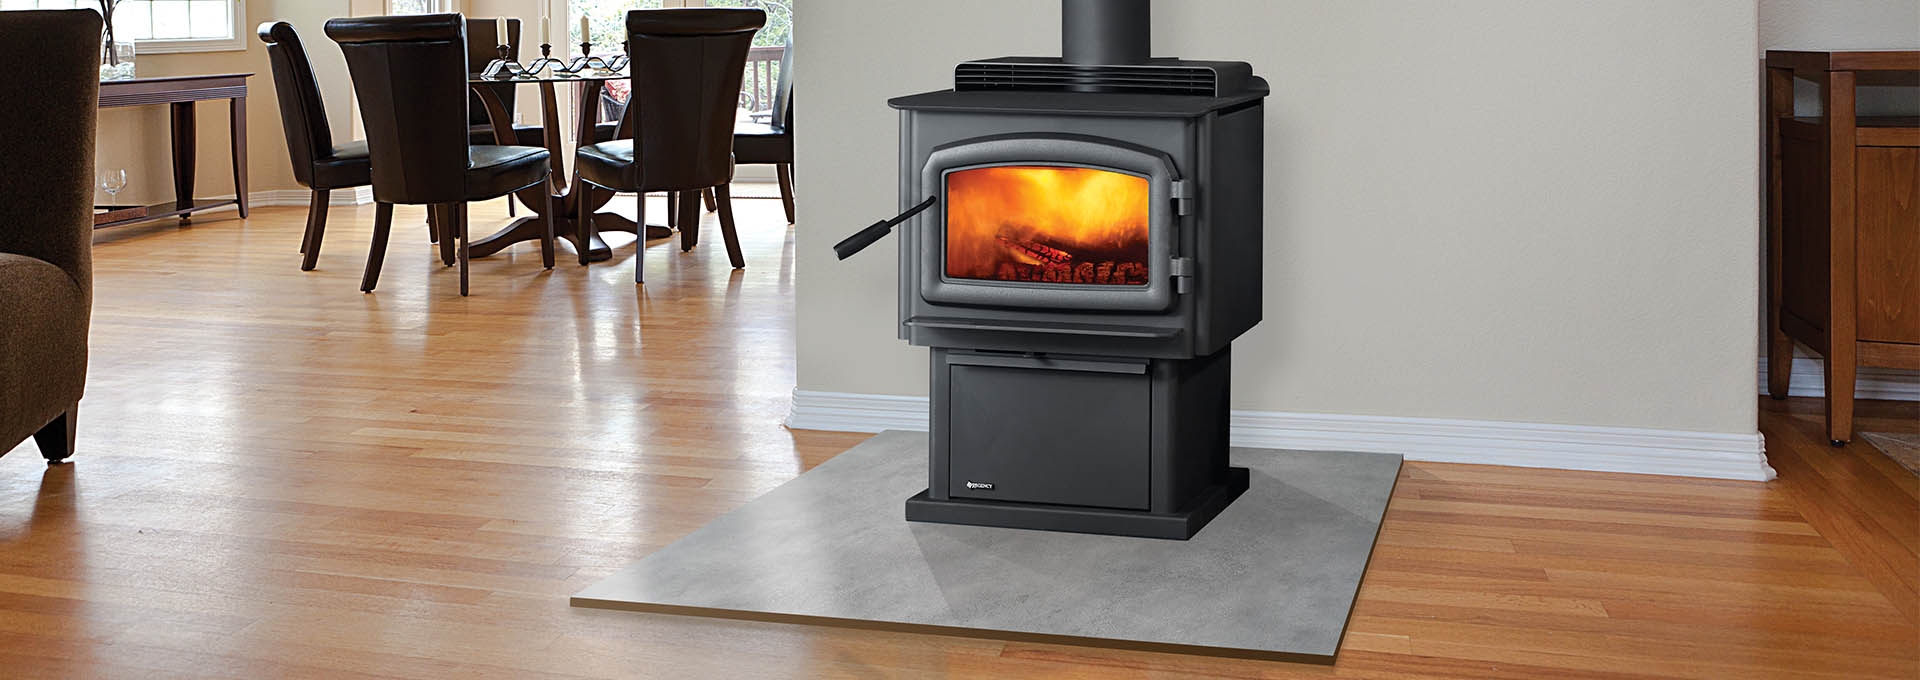 black, free-standing wood stove made by regency near kitchen